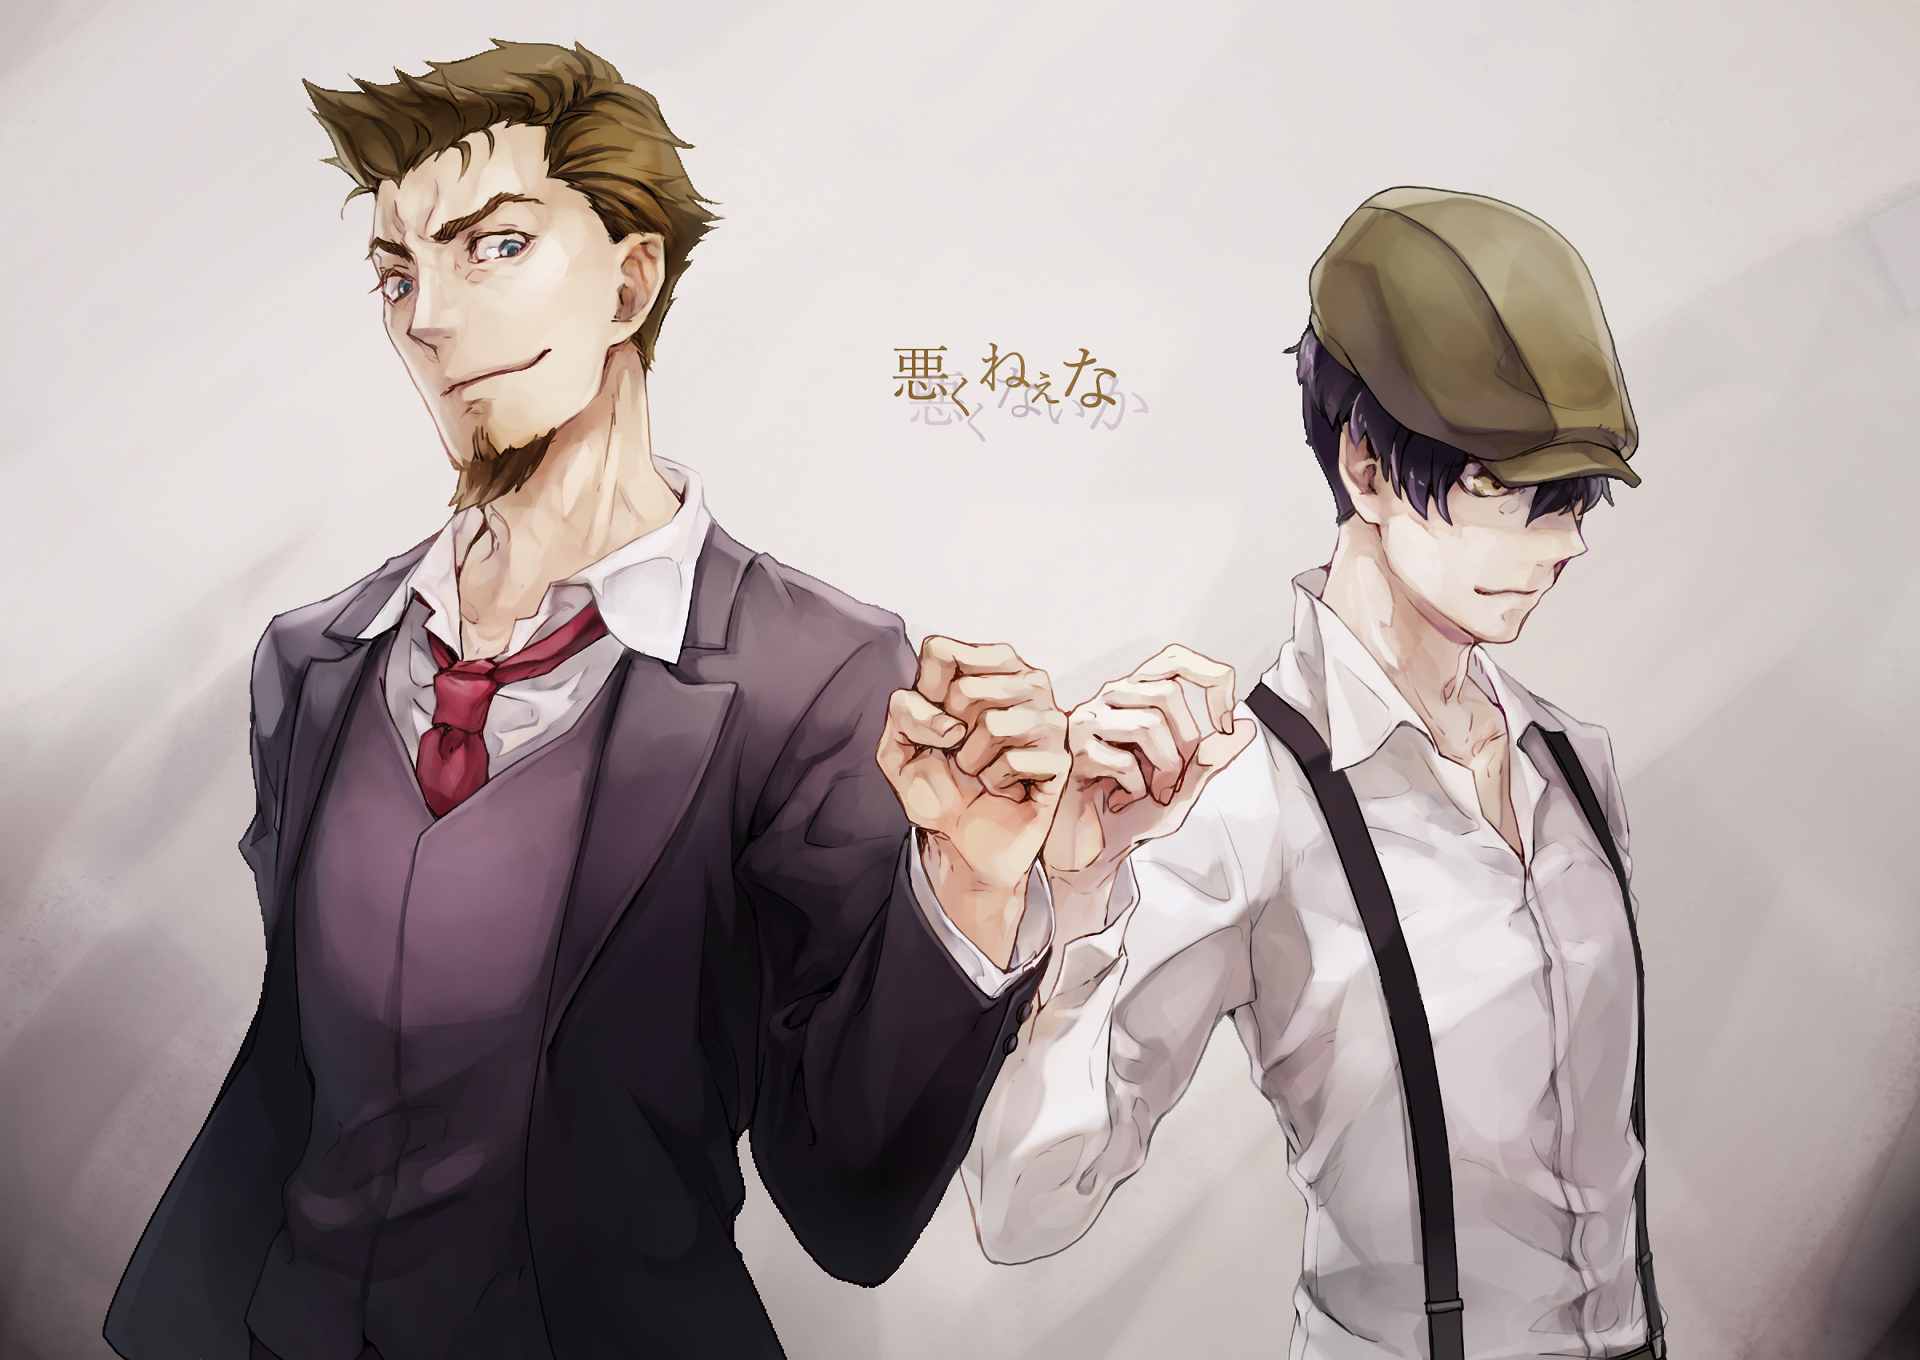 Anime 91 Days HD Wallpaper | Background Image